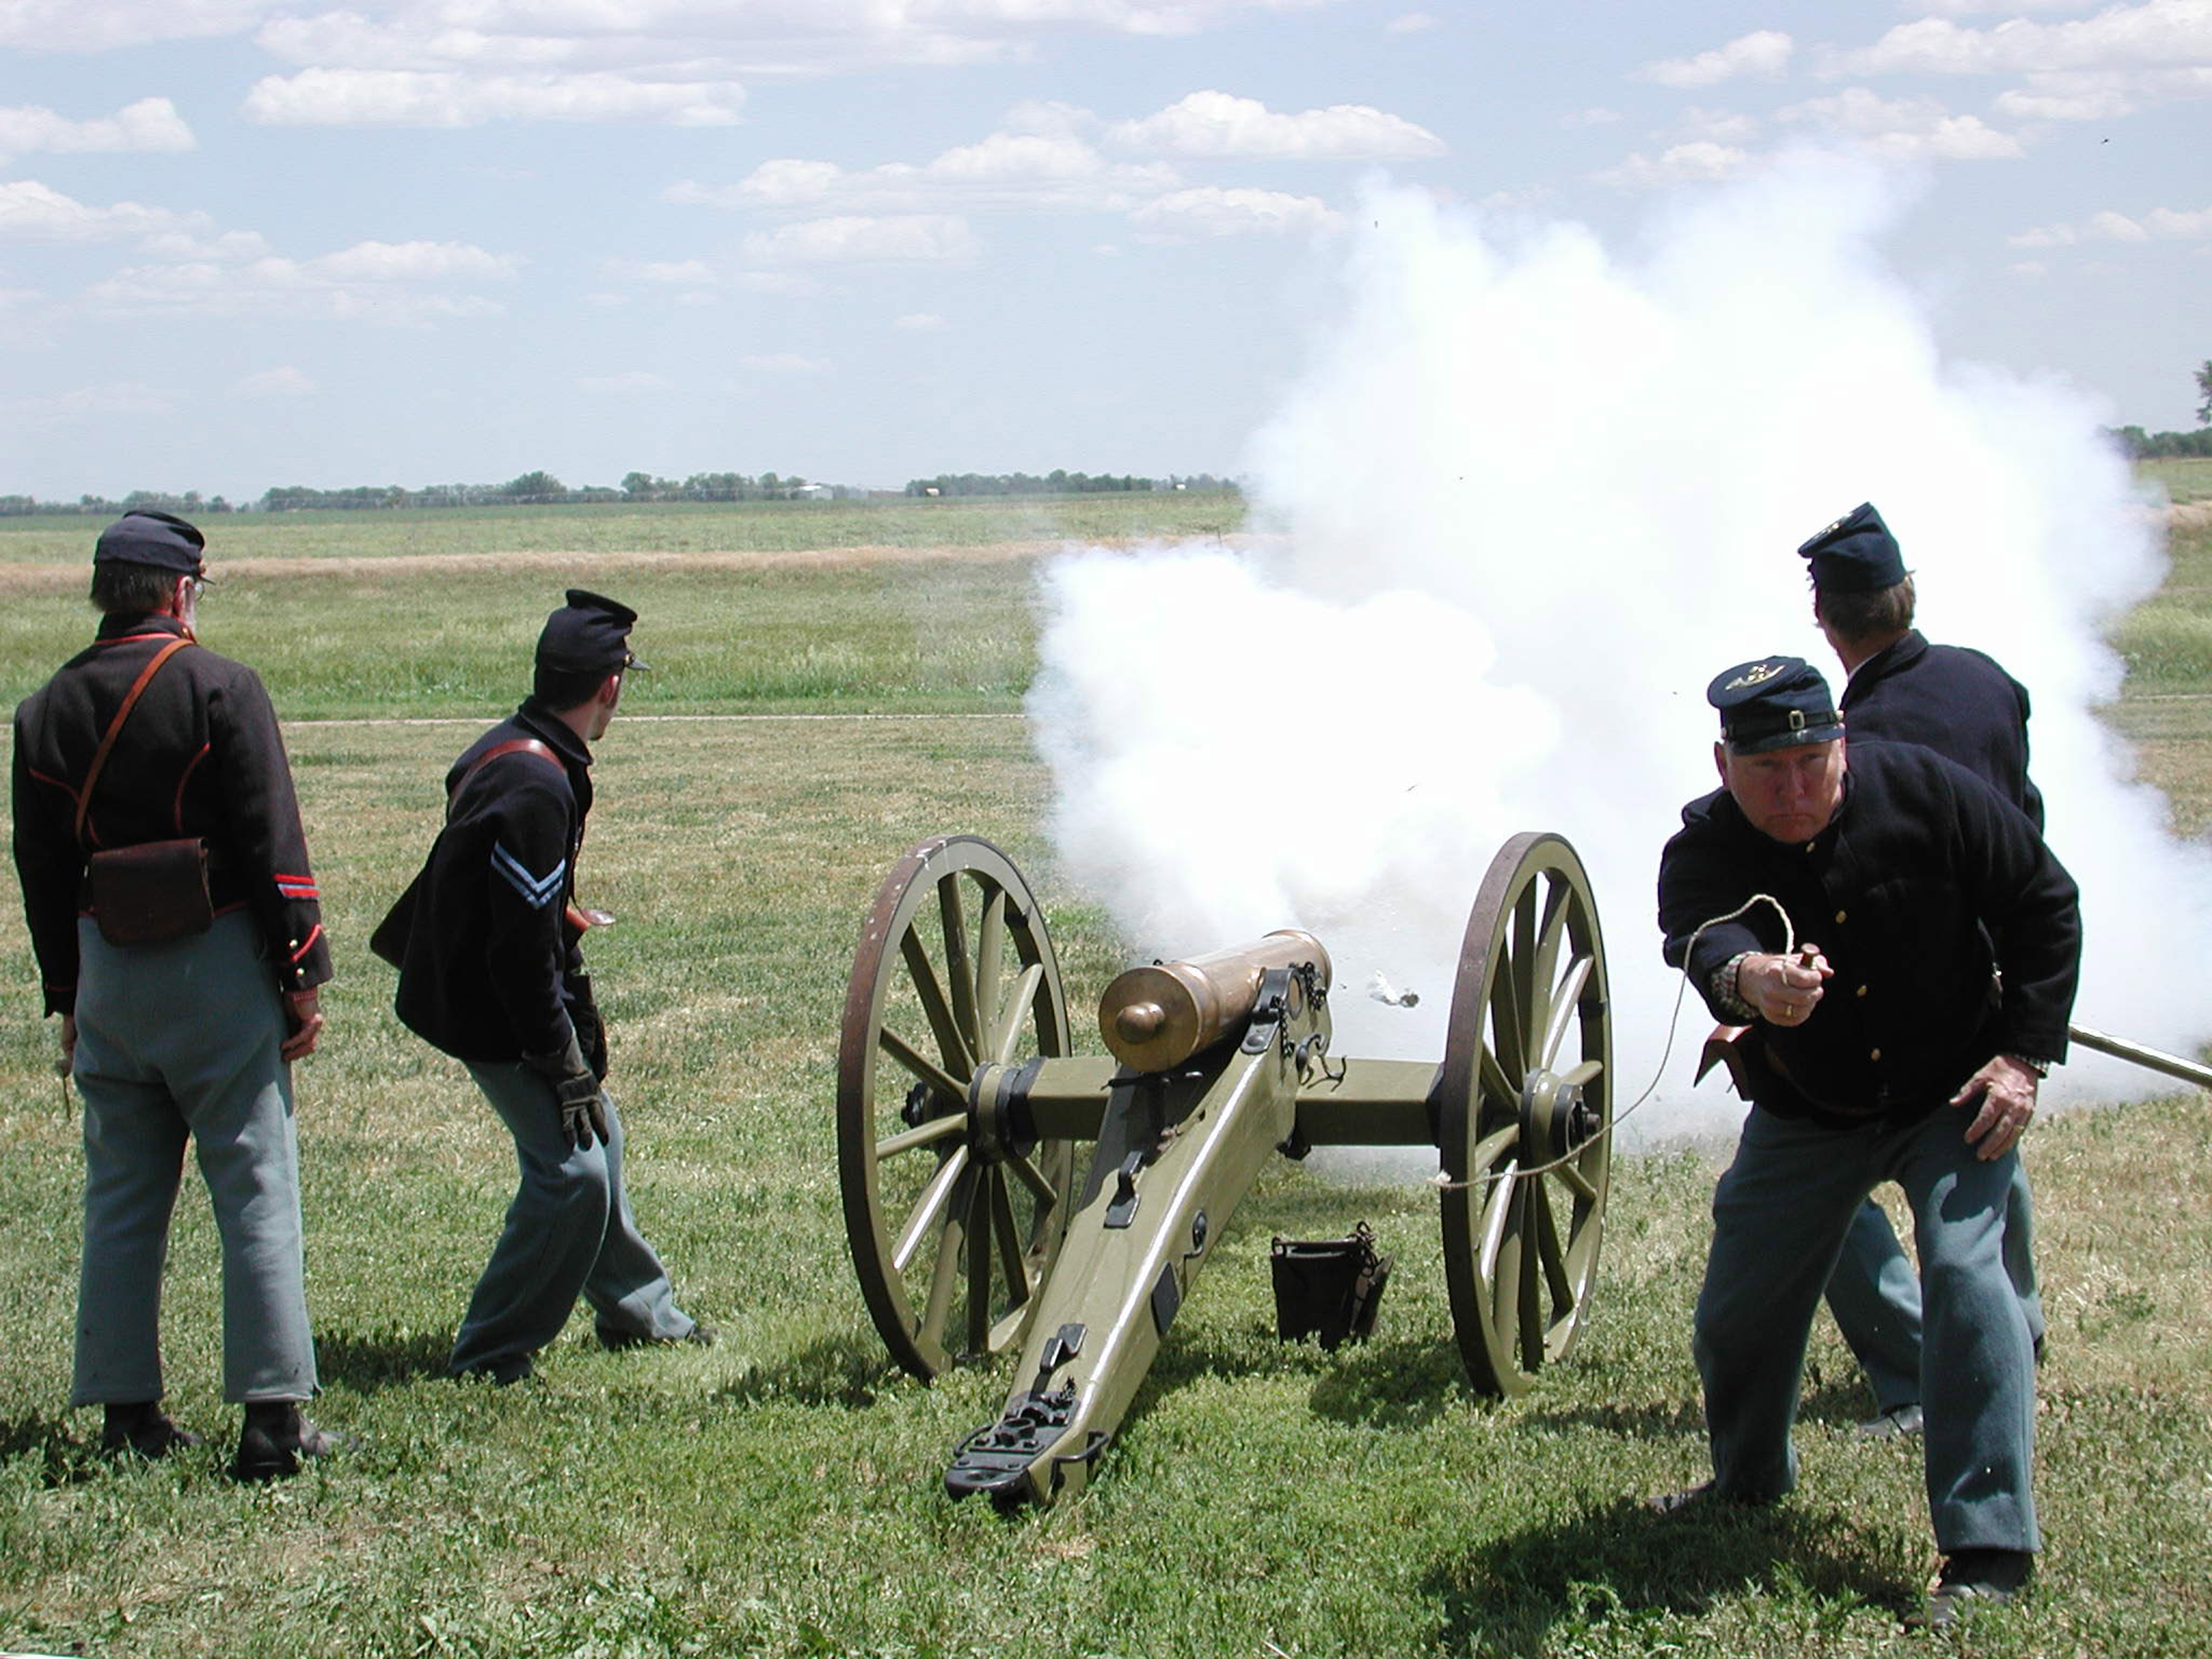 Men in 19th century U.S. Army uniforms fire a reproduction period cannon.